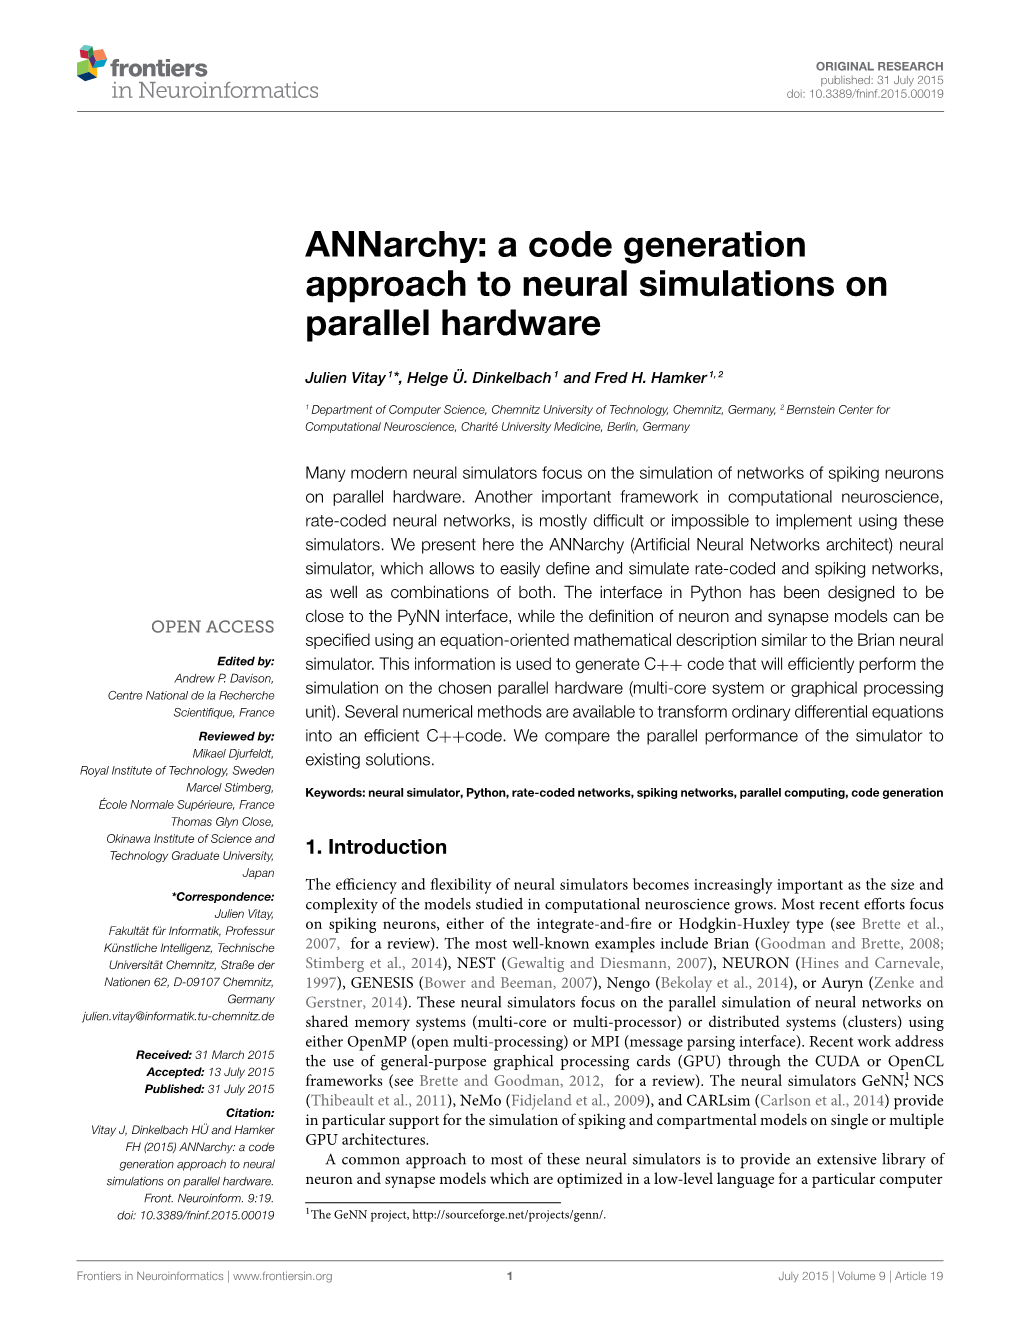 A Code Generation Approach to Neural Simulations on Parallel Hardware